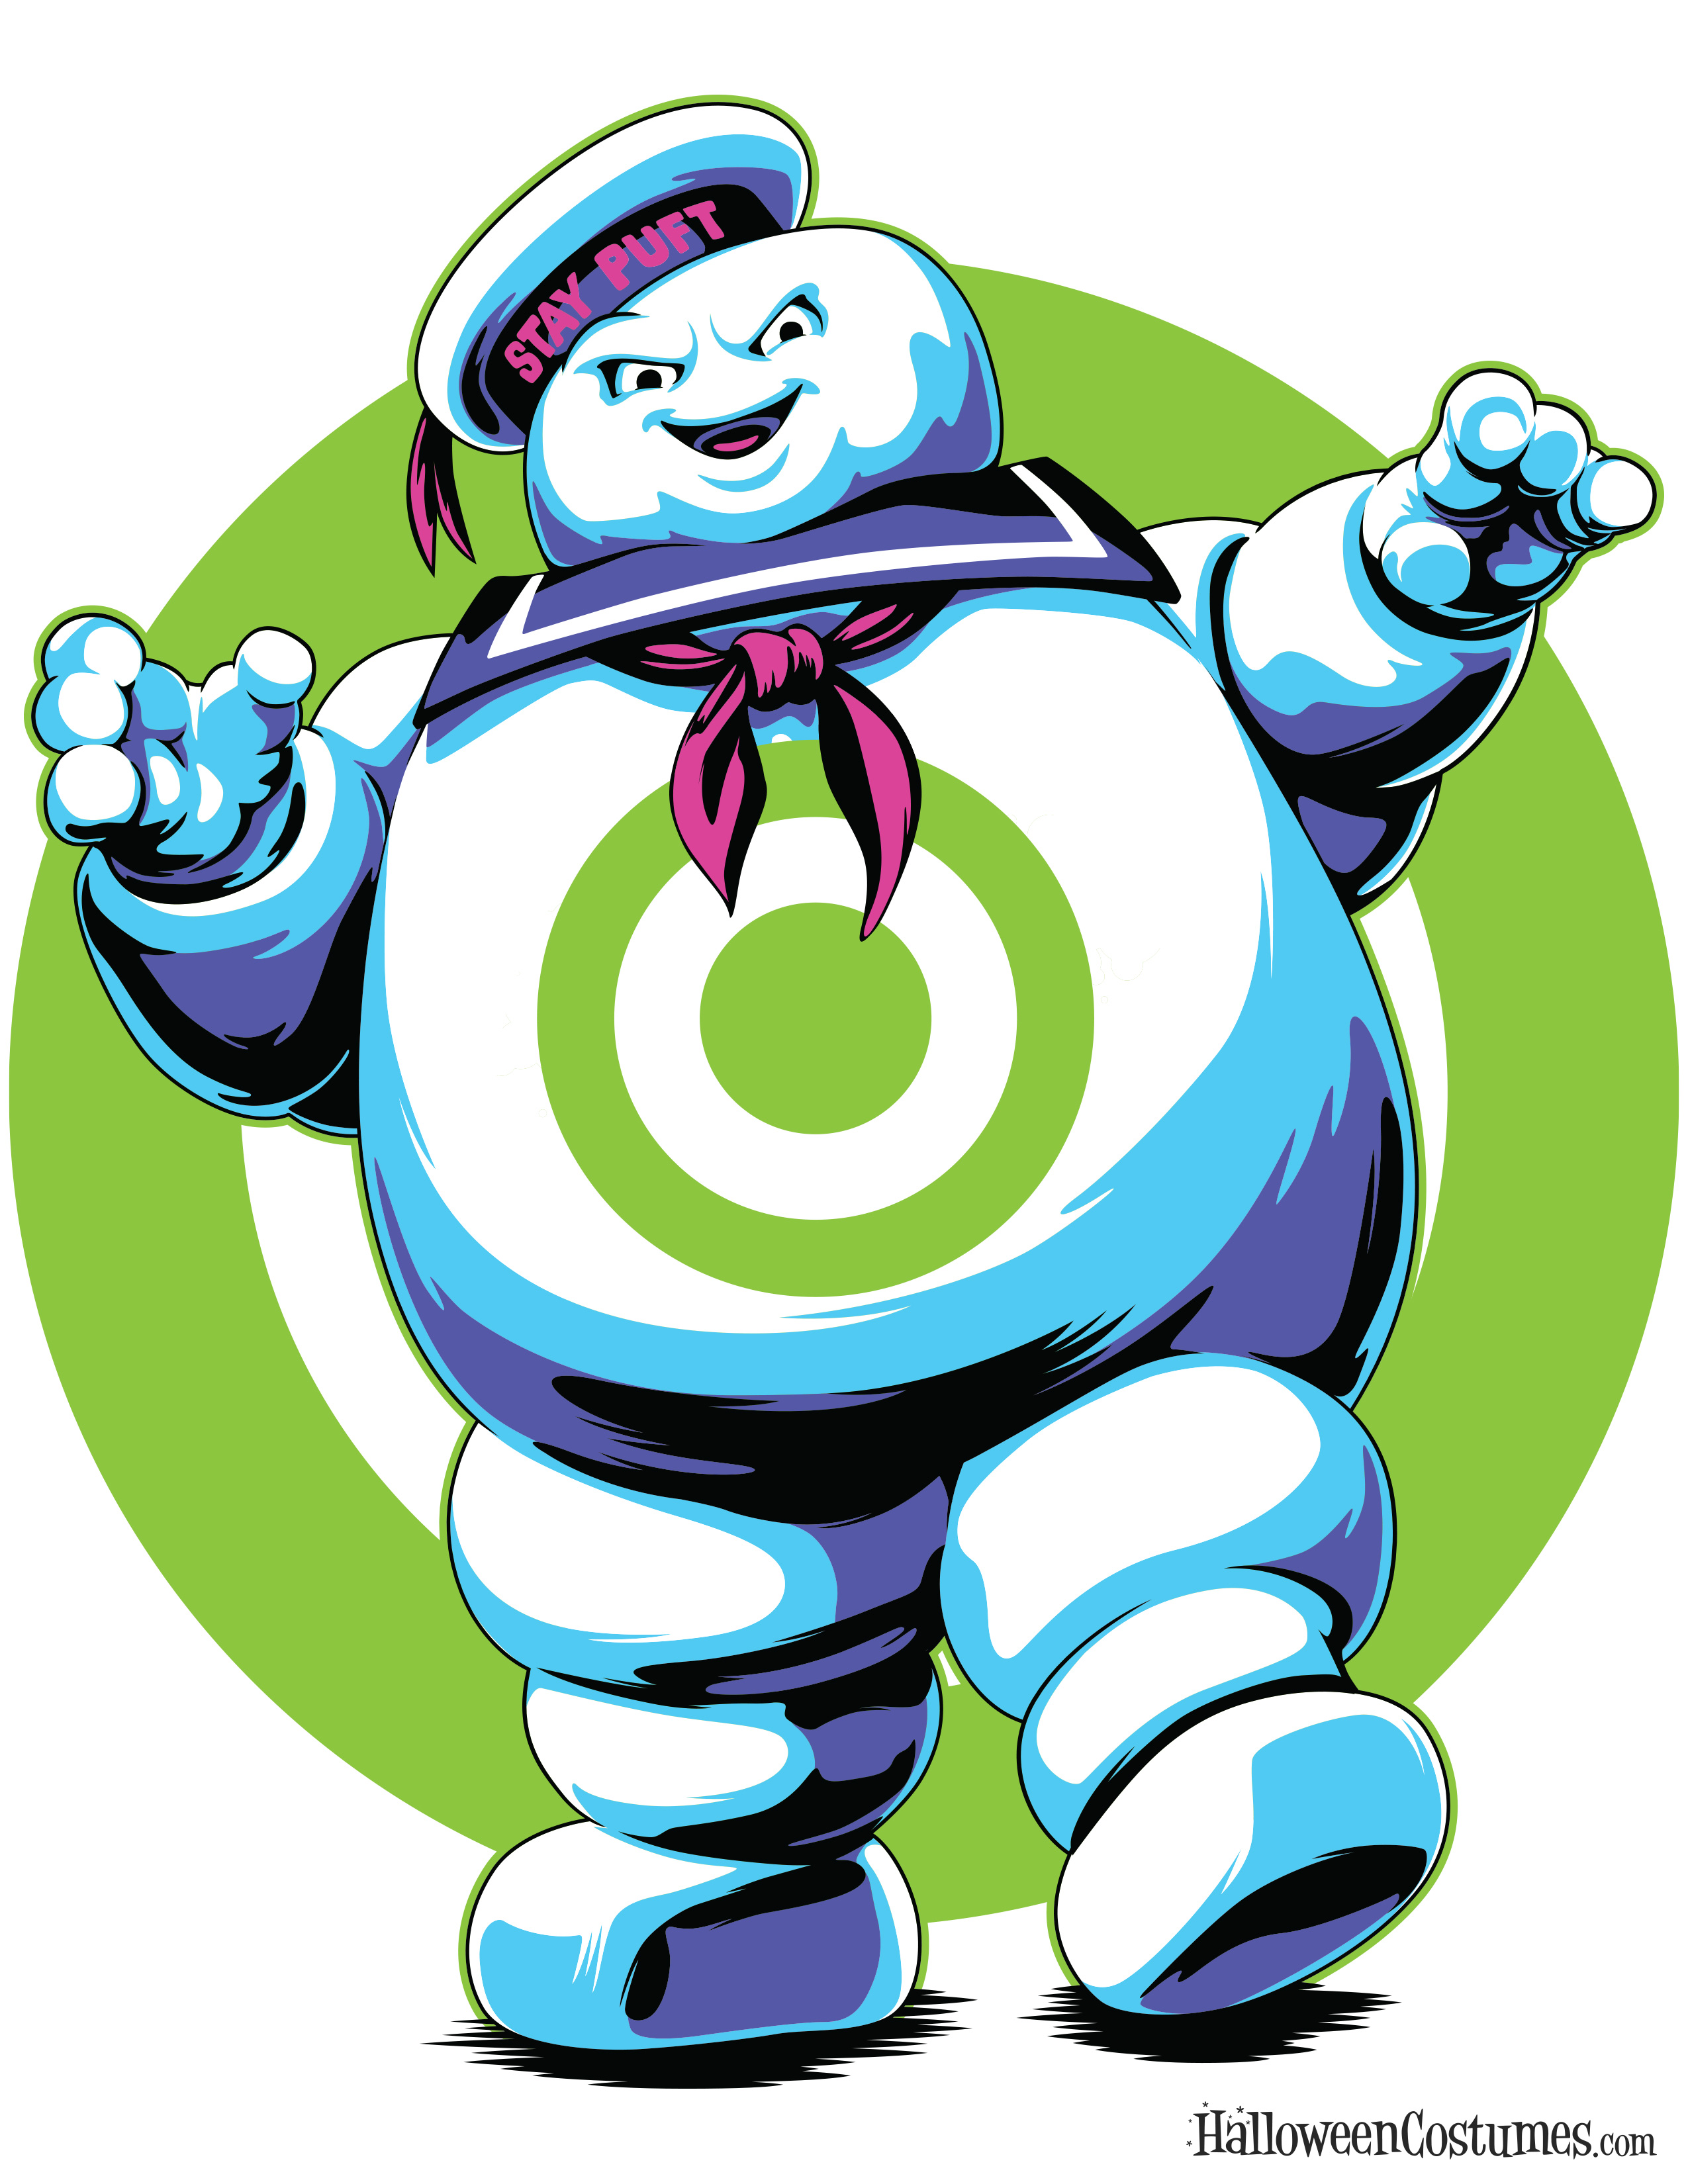 Ghostbusters Stay Puft Marshmallow Man Target